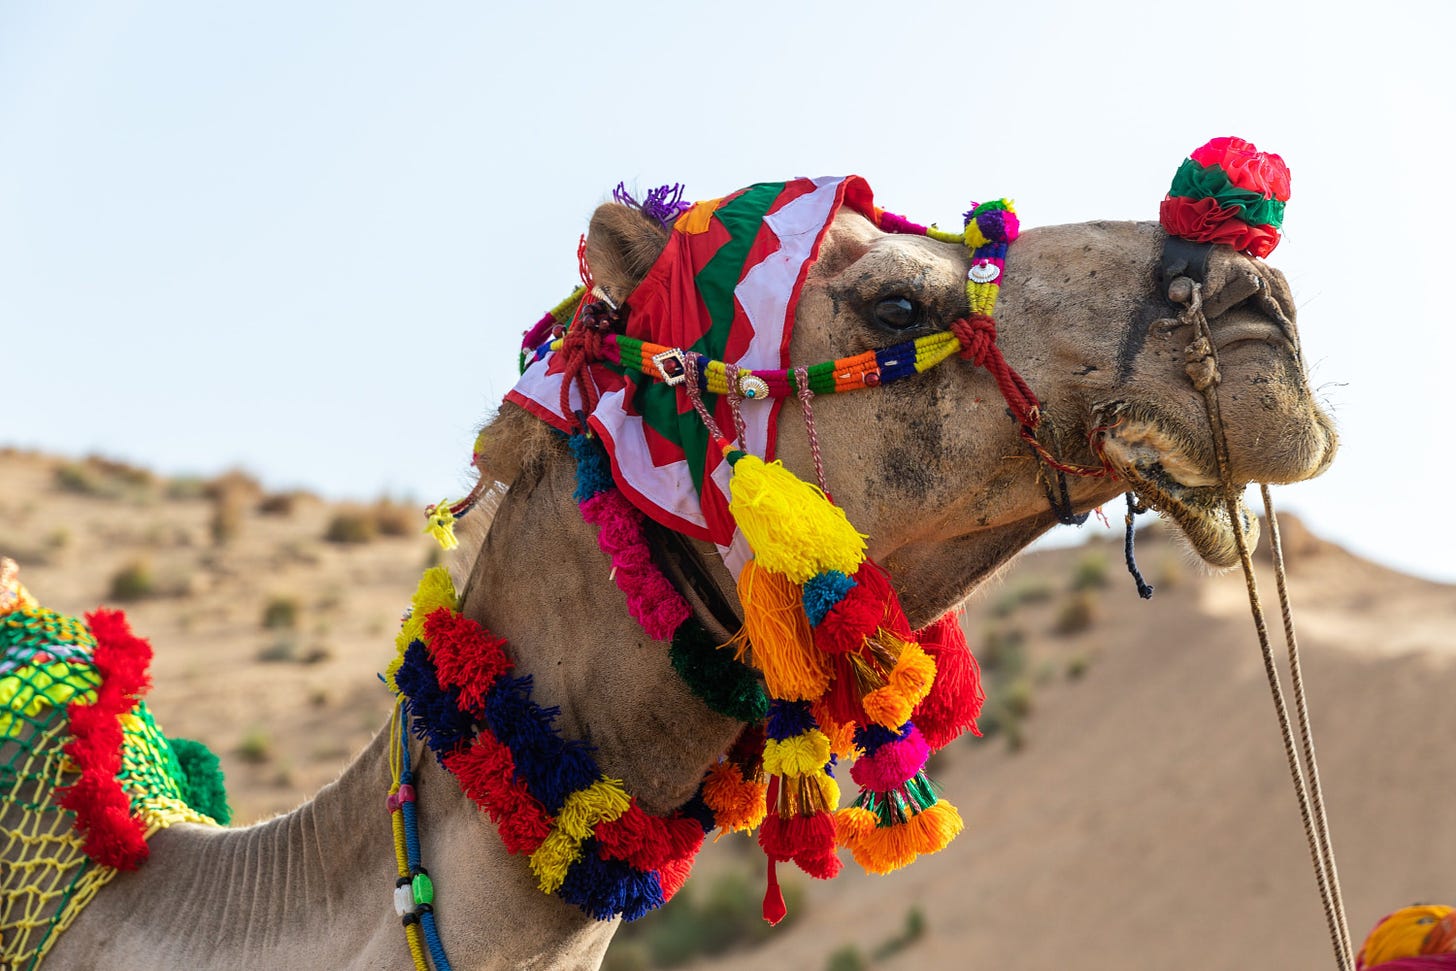 a camel with a colorful headress